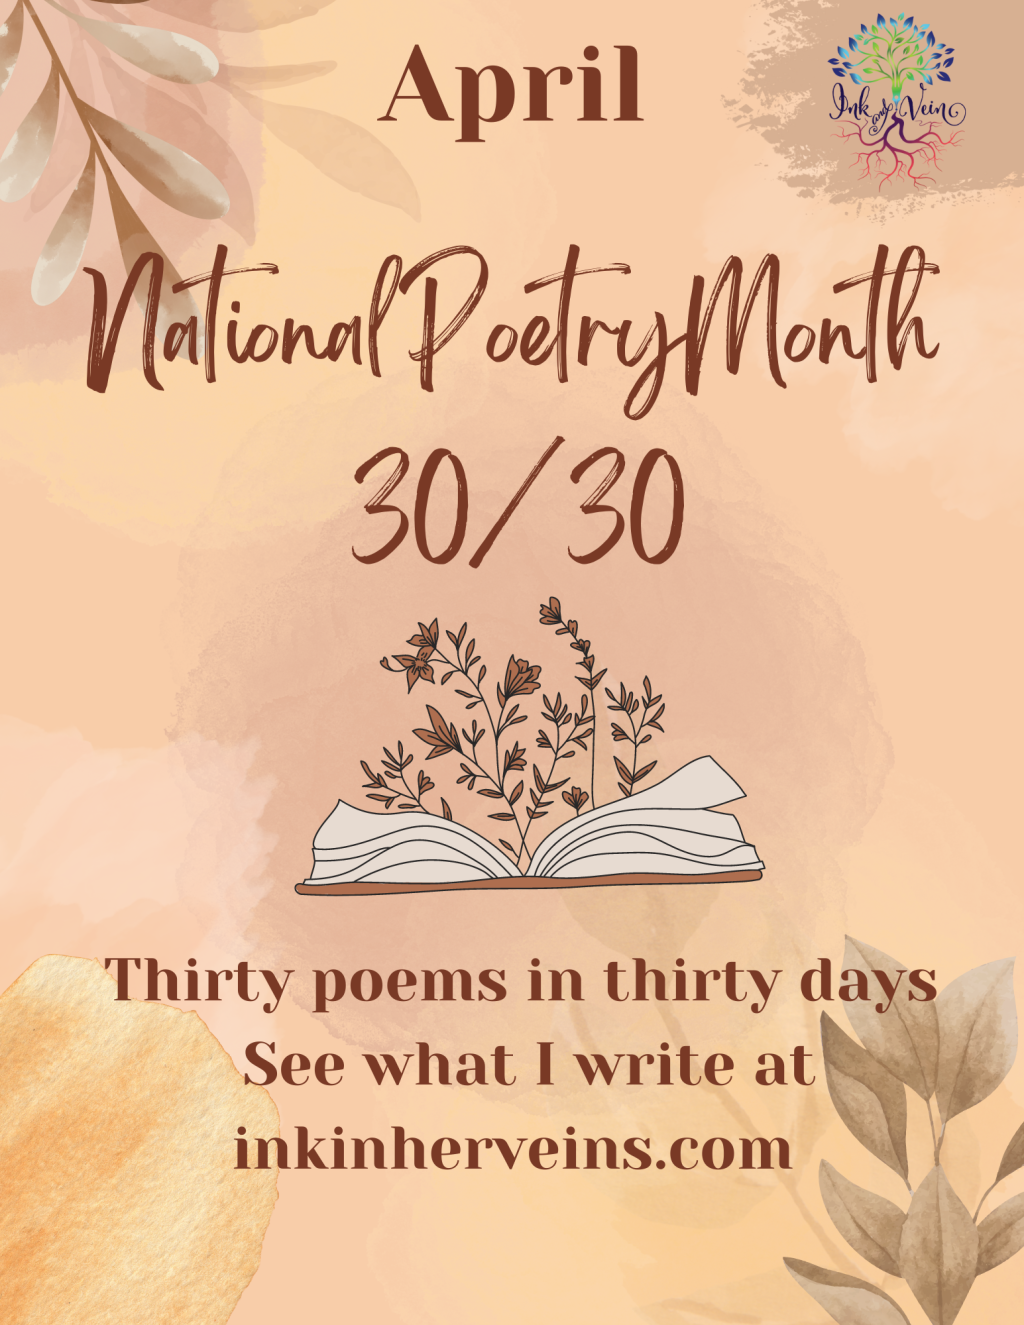 shades of pink with brown letters that read "National Poetry Month 30/30" over an open book with flowers growing from it. Text below the book reads "thirty poems in thirty days. See what I write at inkinherveins.com"